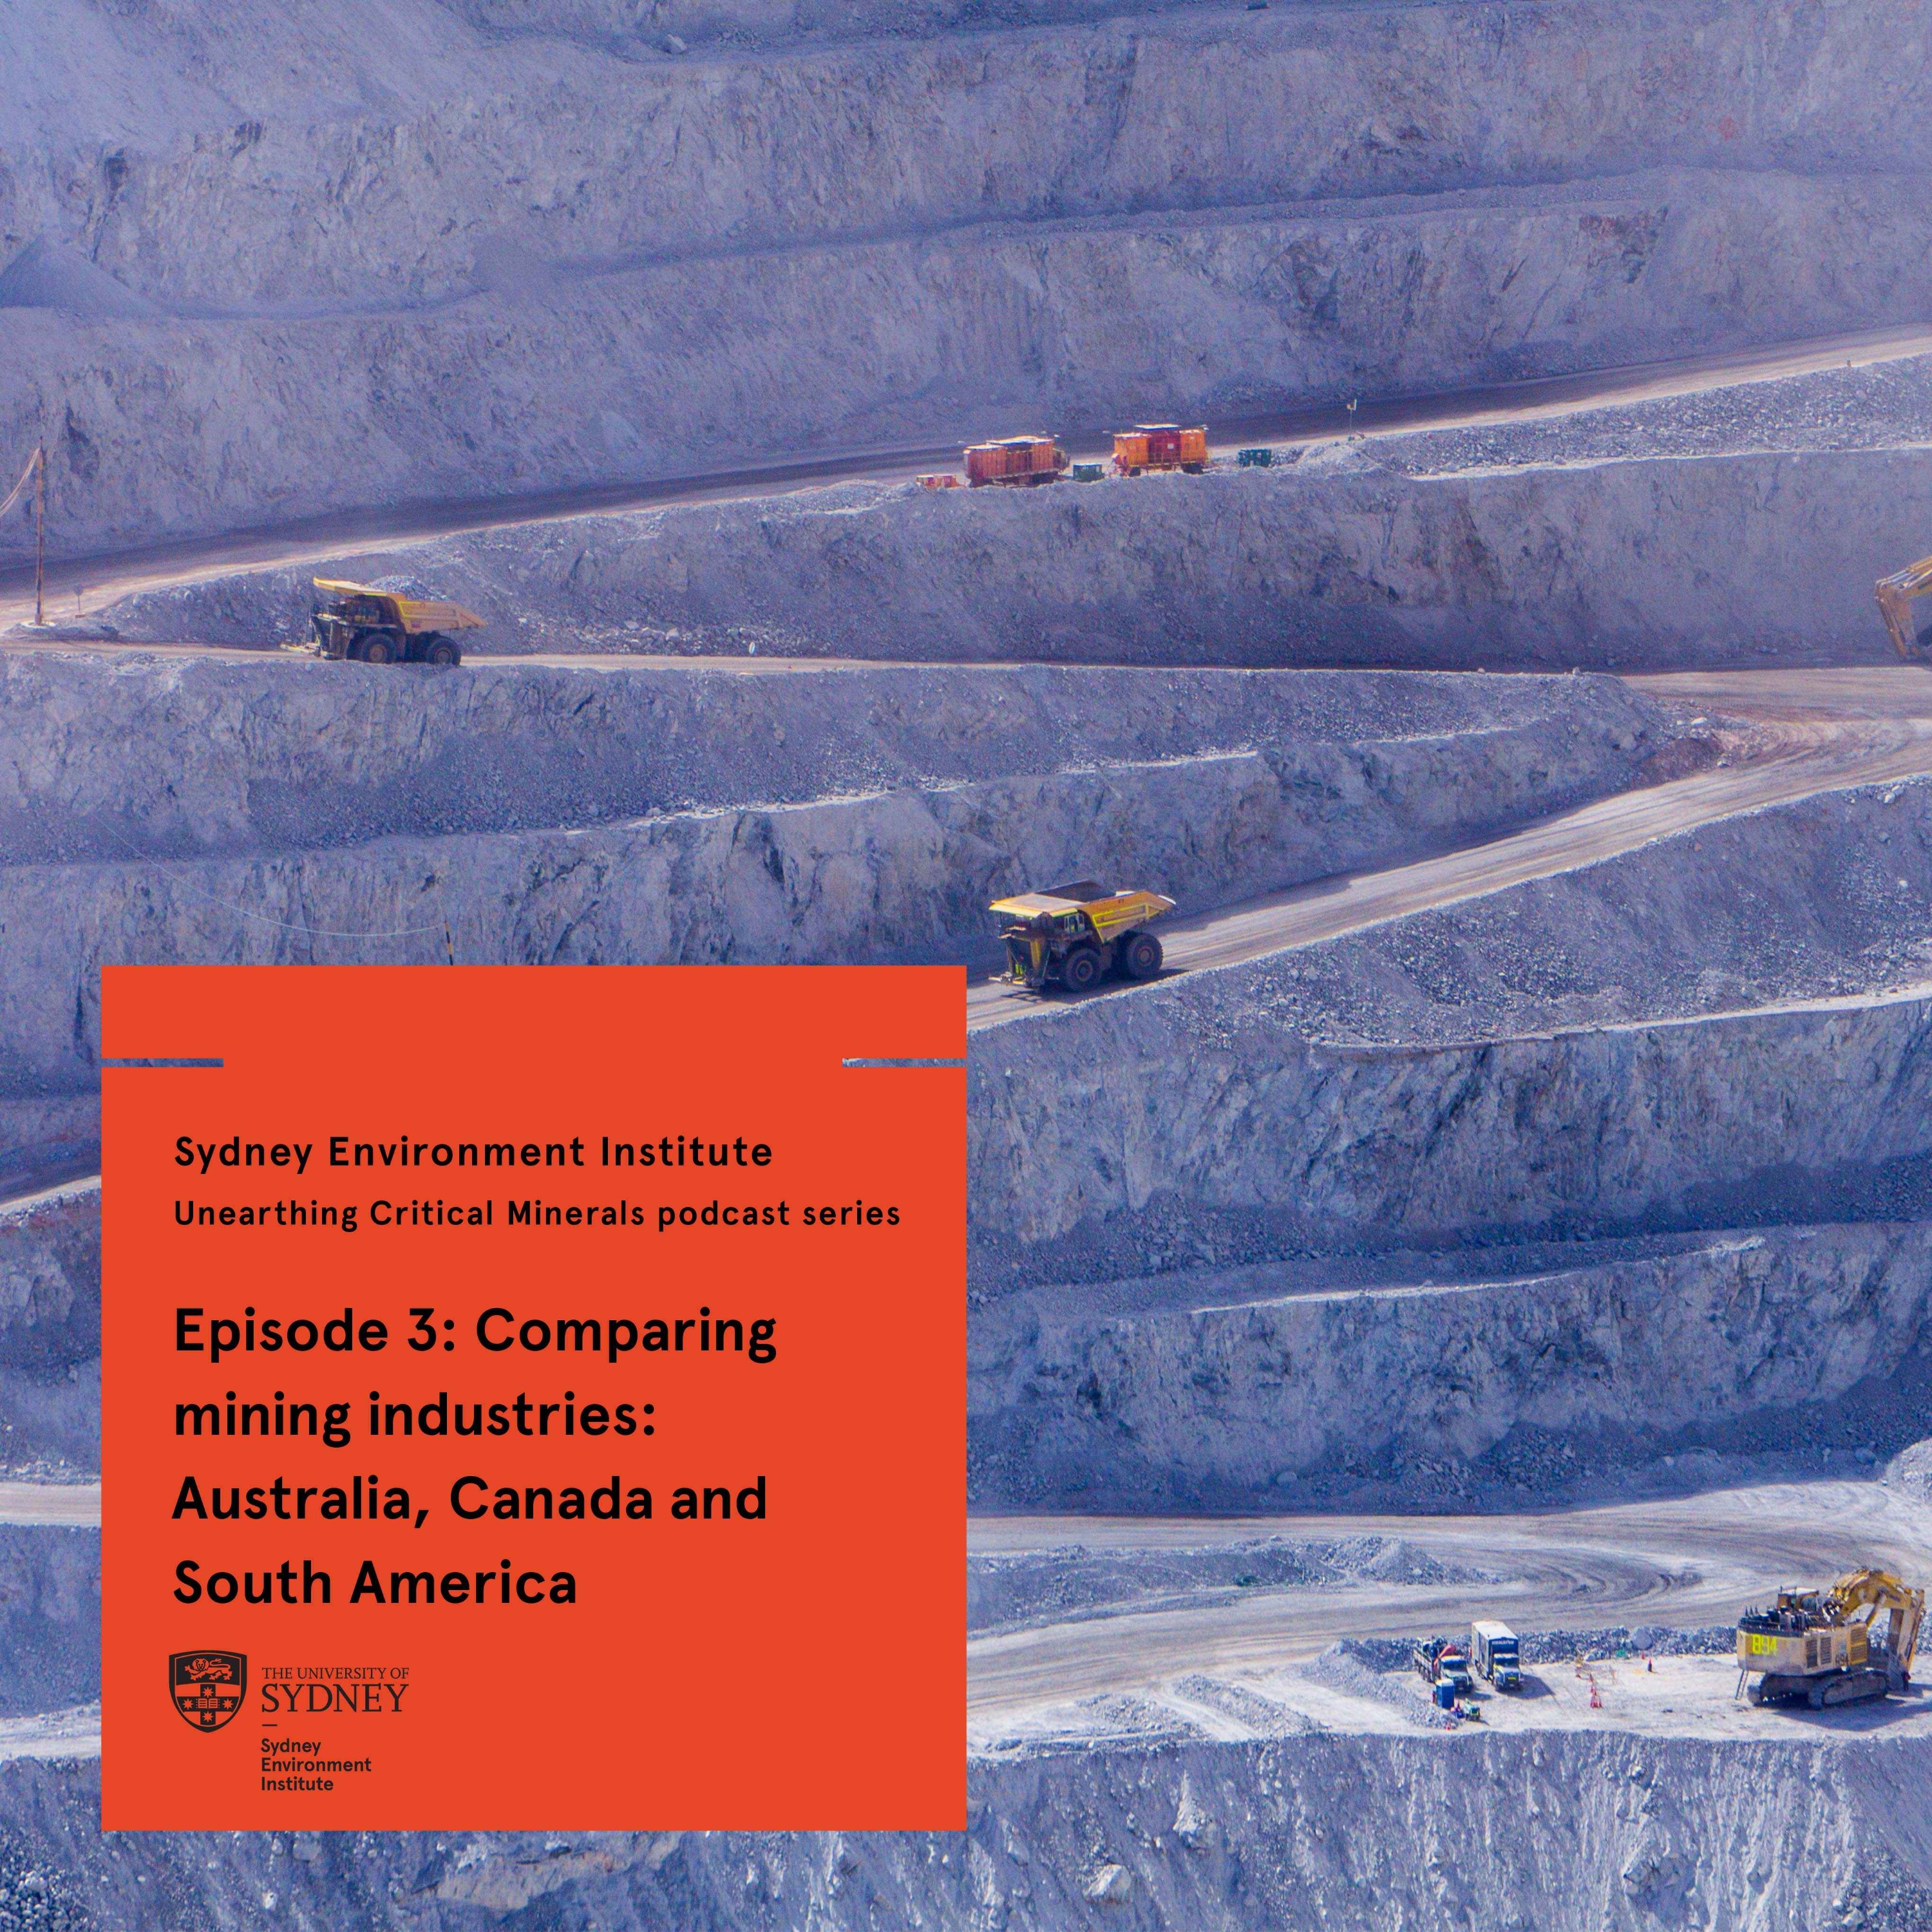 Episode 3: Comparing mining industries: Australia, Canada and South America